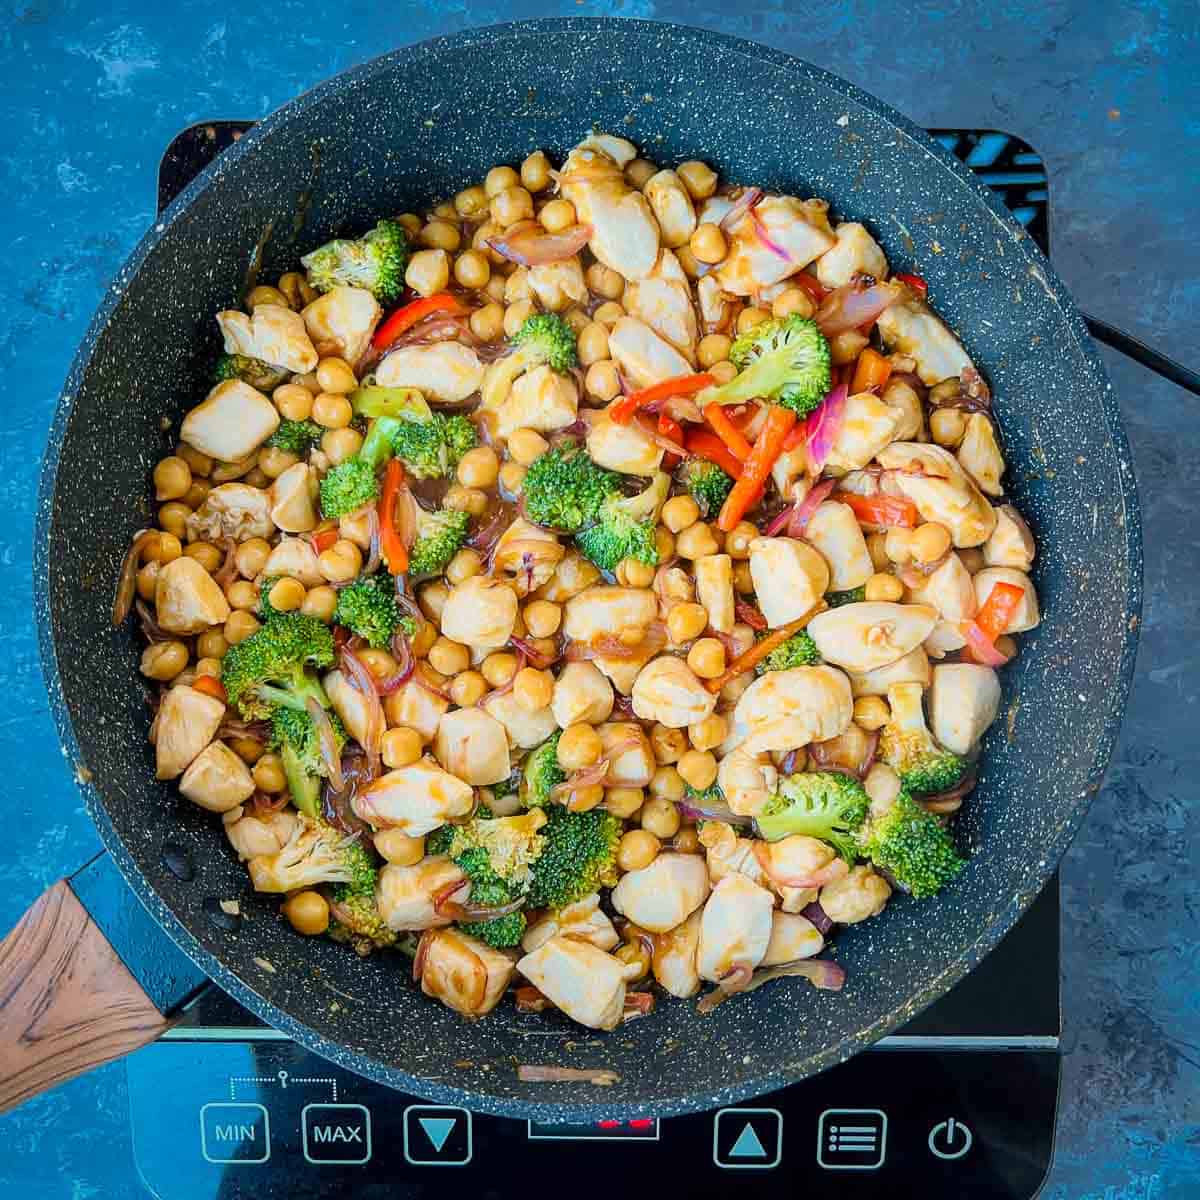 Chicken, chickpeas, and sauce in frying pan.